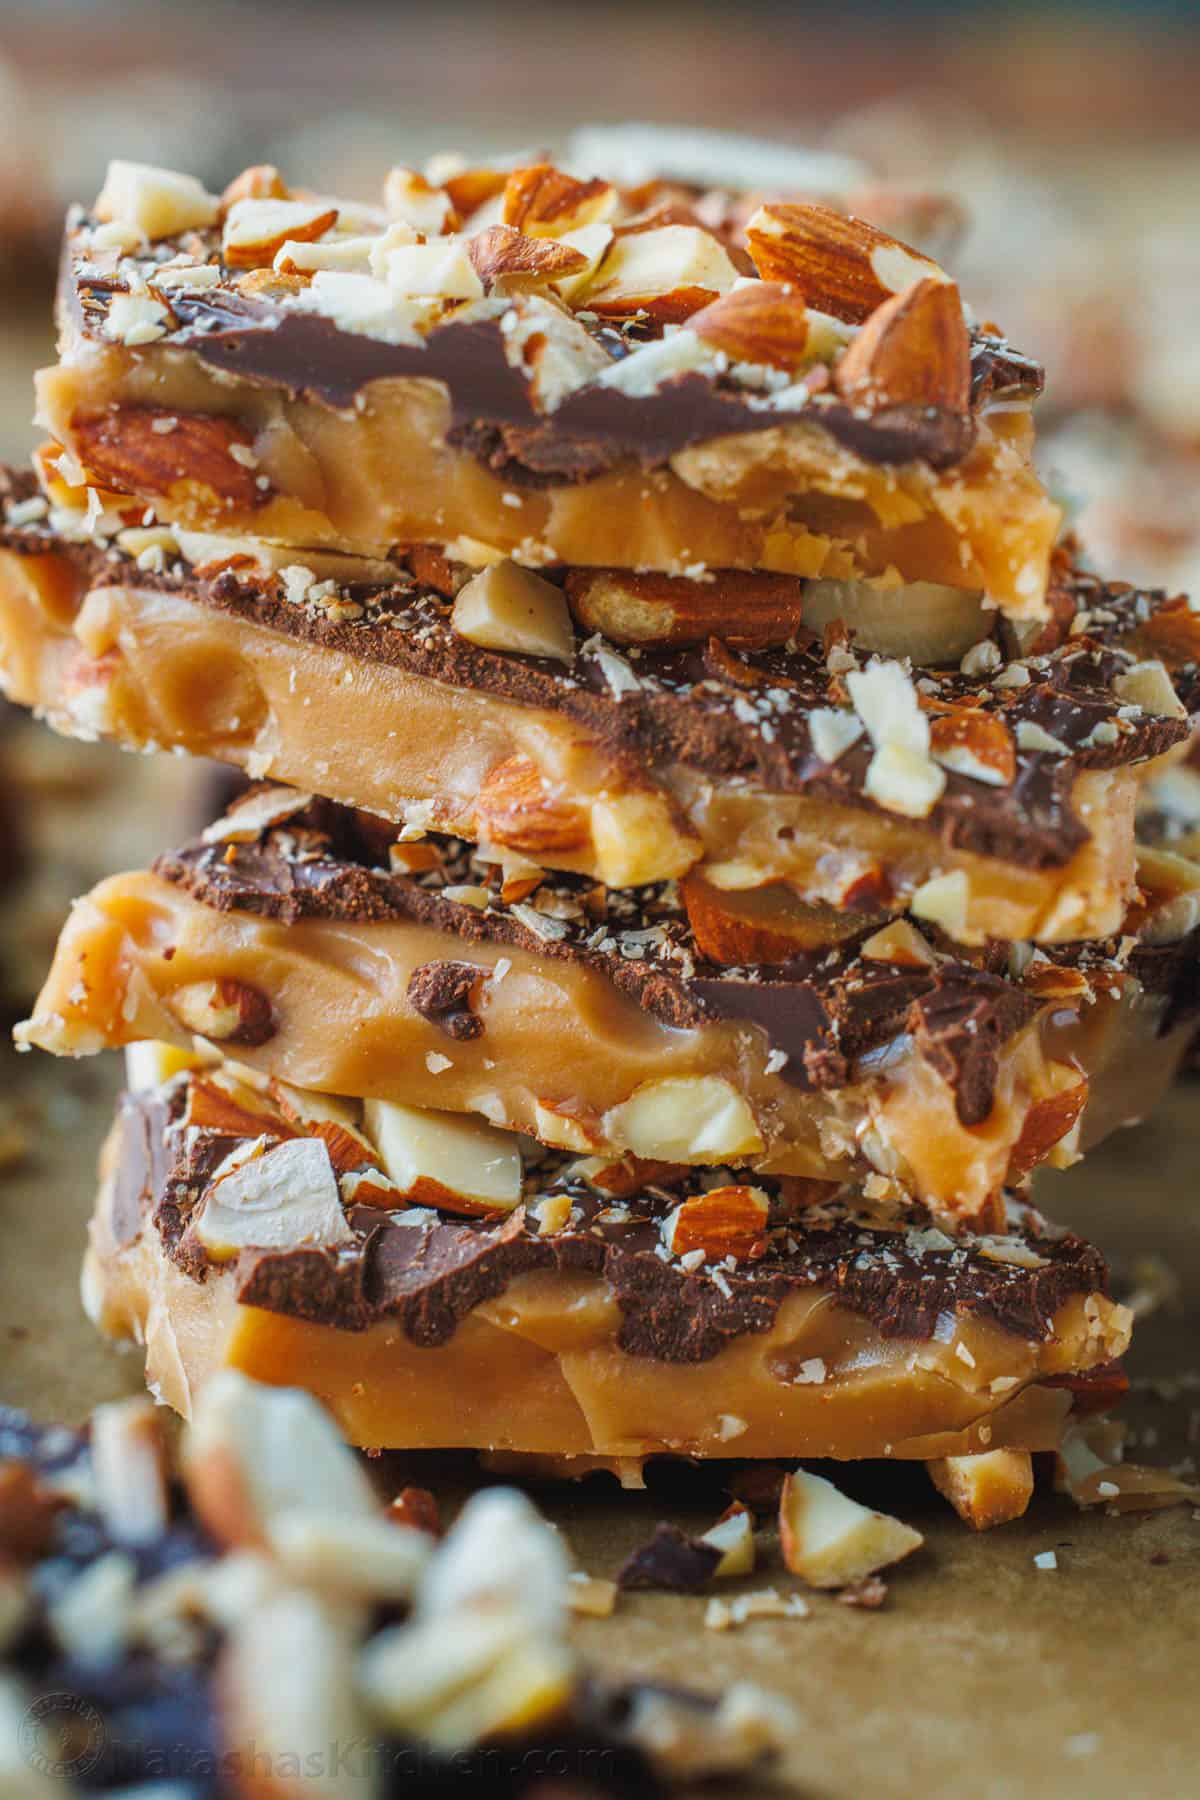 Toffee candy stacked up high with almonds and chocolate